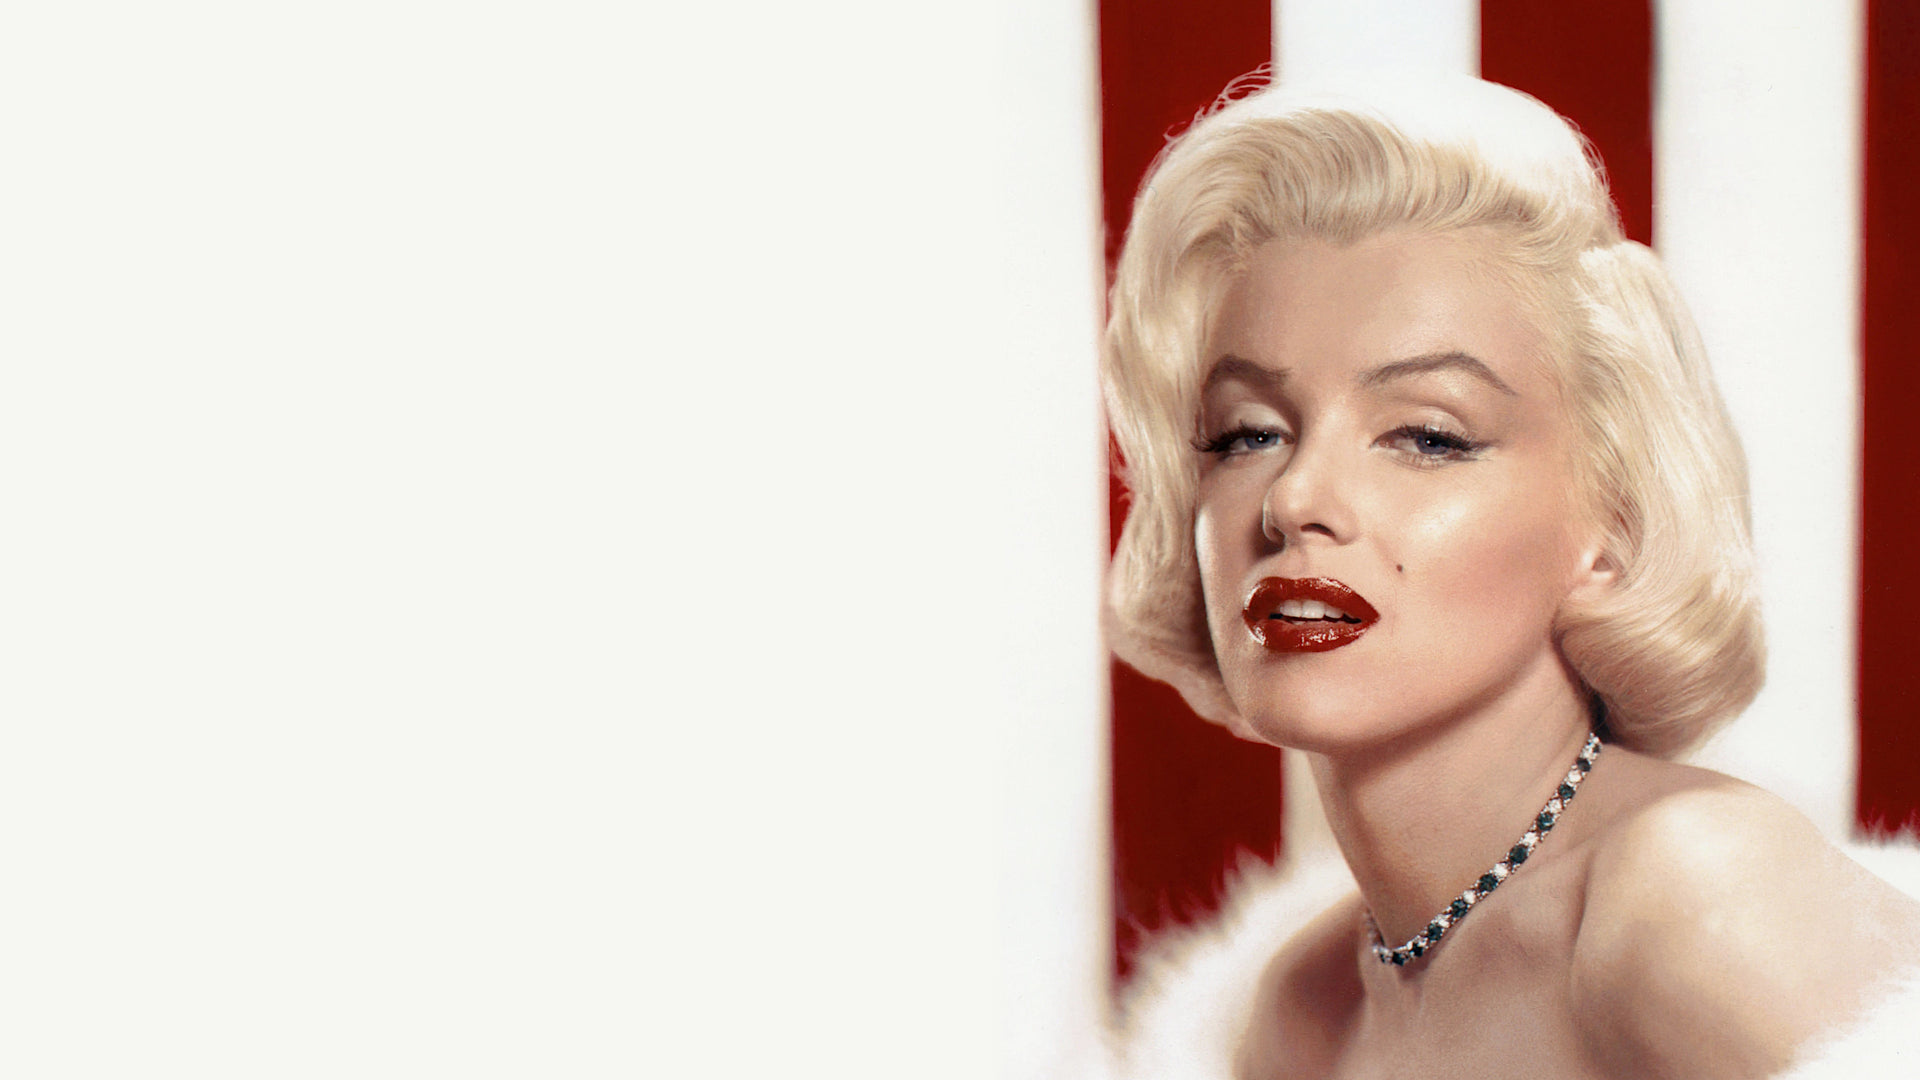 Marilyn Monroe Women Actress Blonde Necklace Closeup Red Lipstick Bare Shoulders White Background Ce 1920x1080